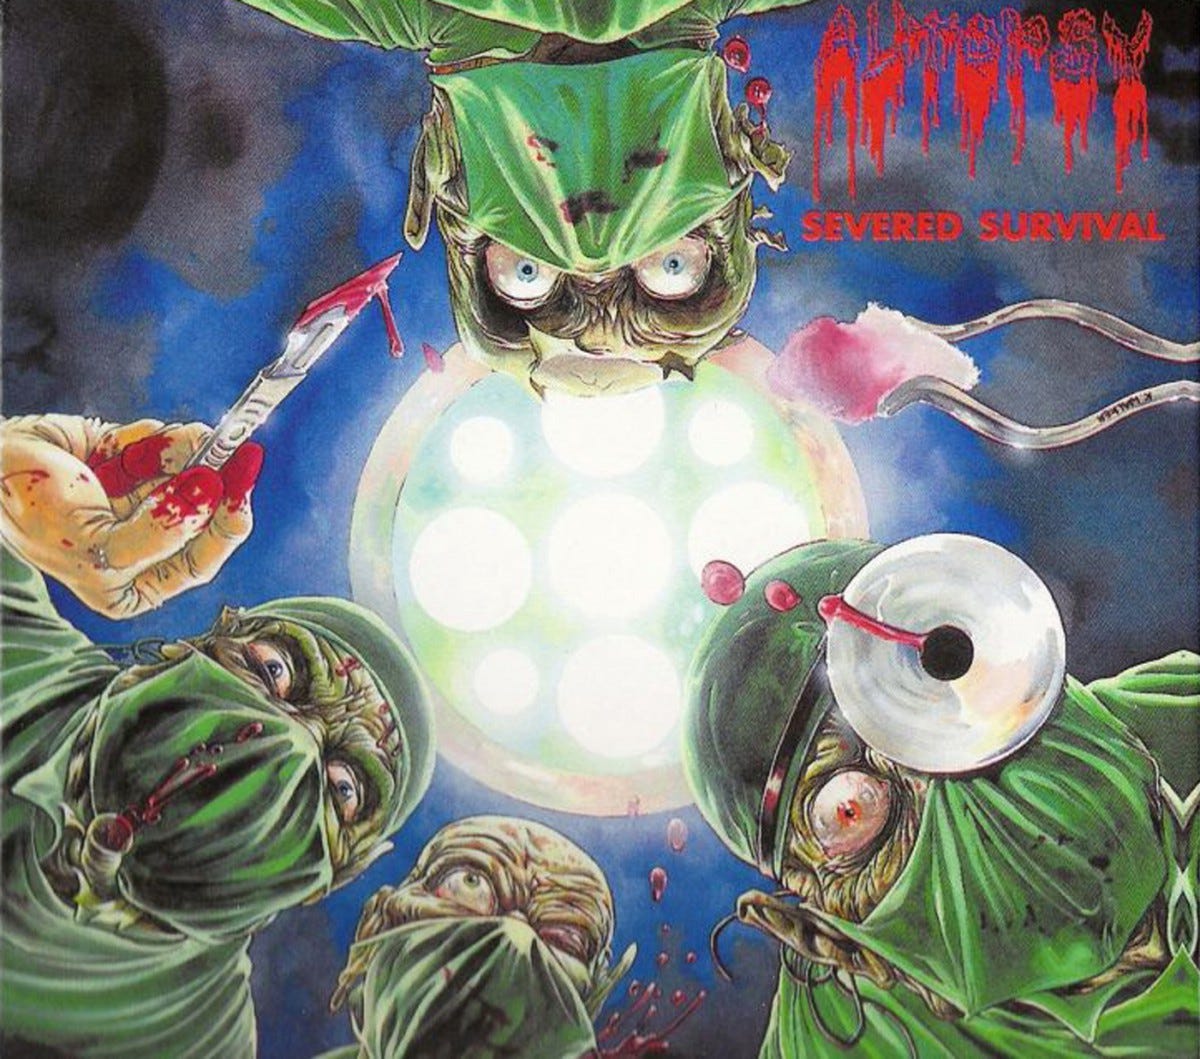 Five death metal album covers that'll give you the chills